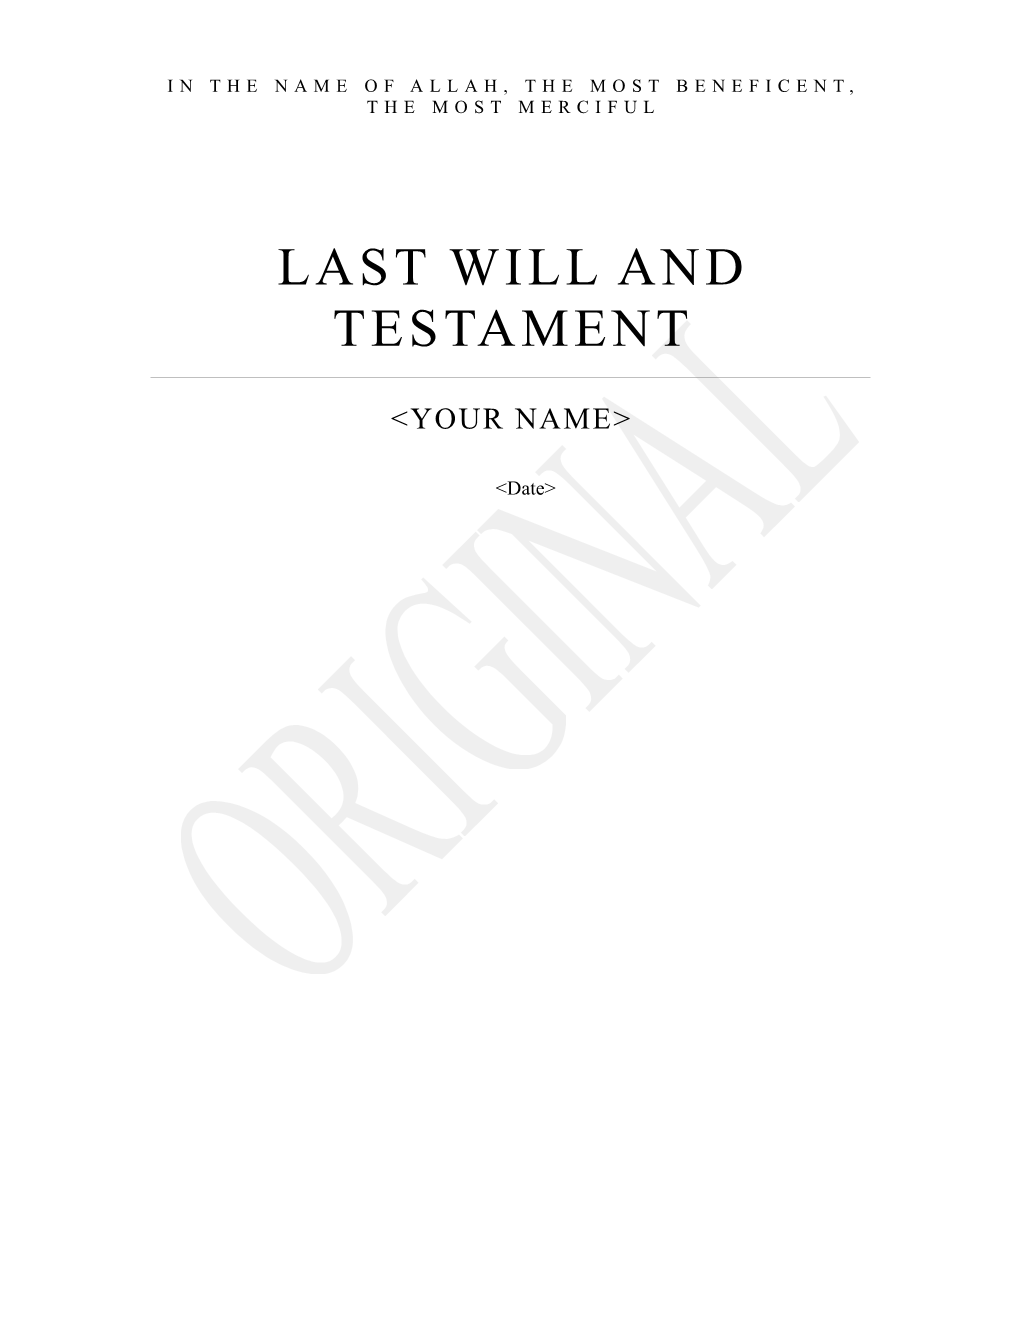 Last Will & Testament of Your Name in Title